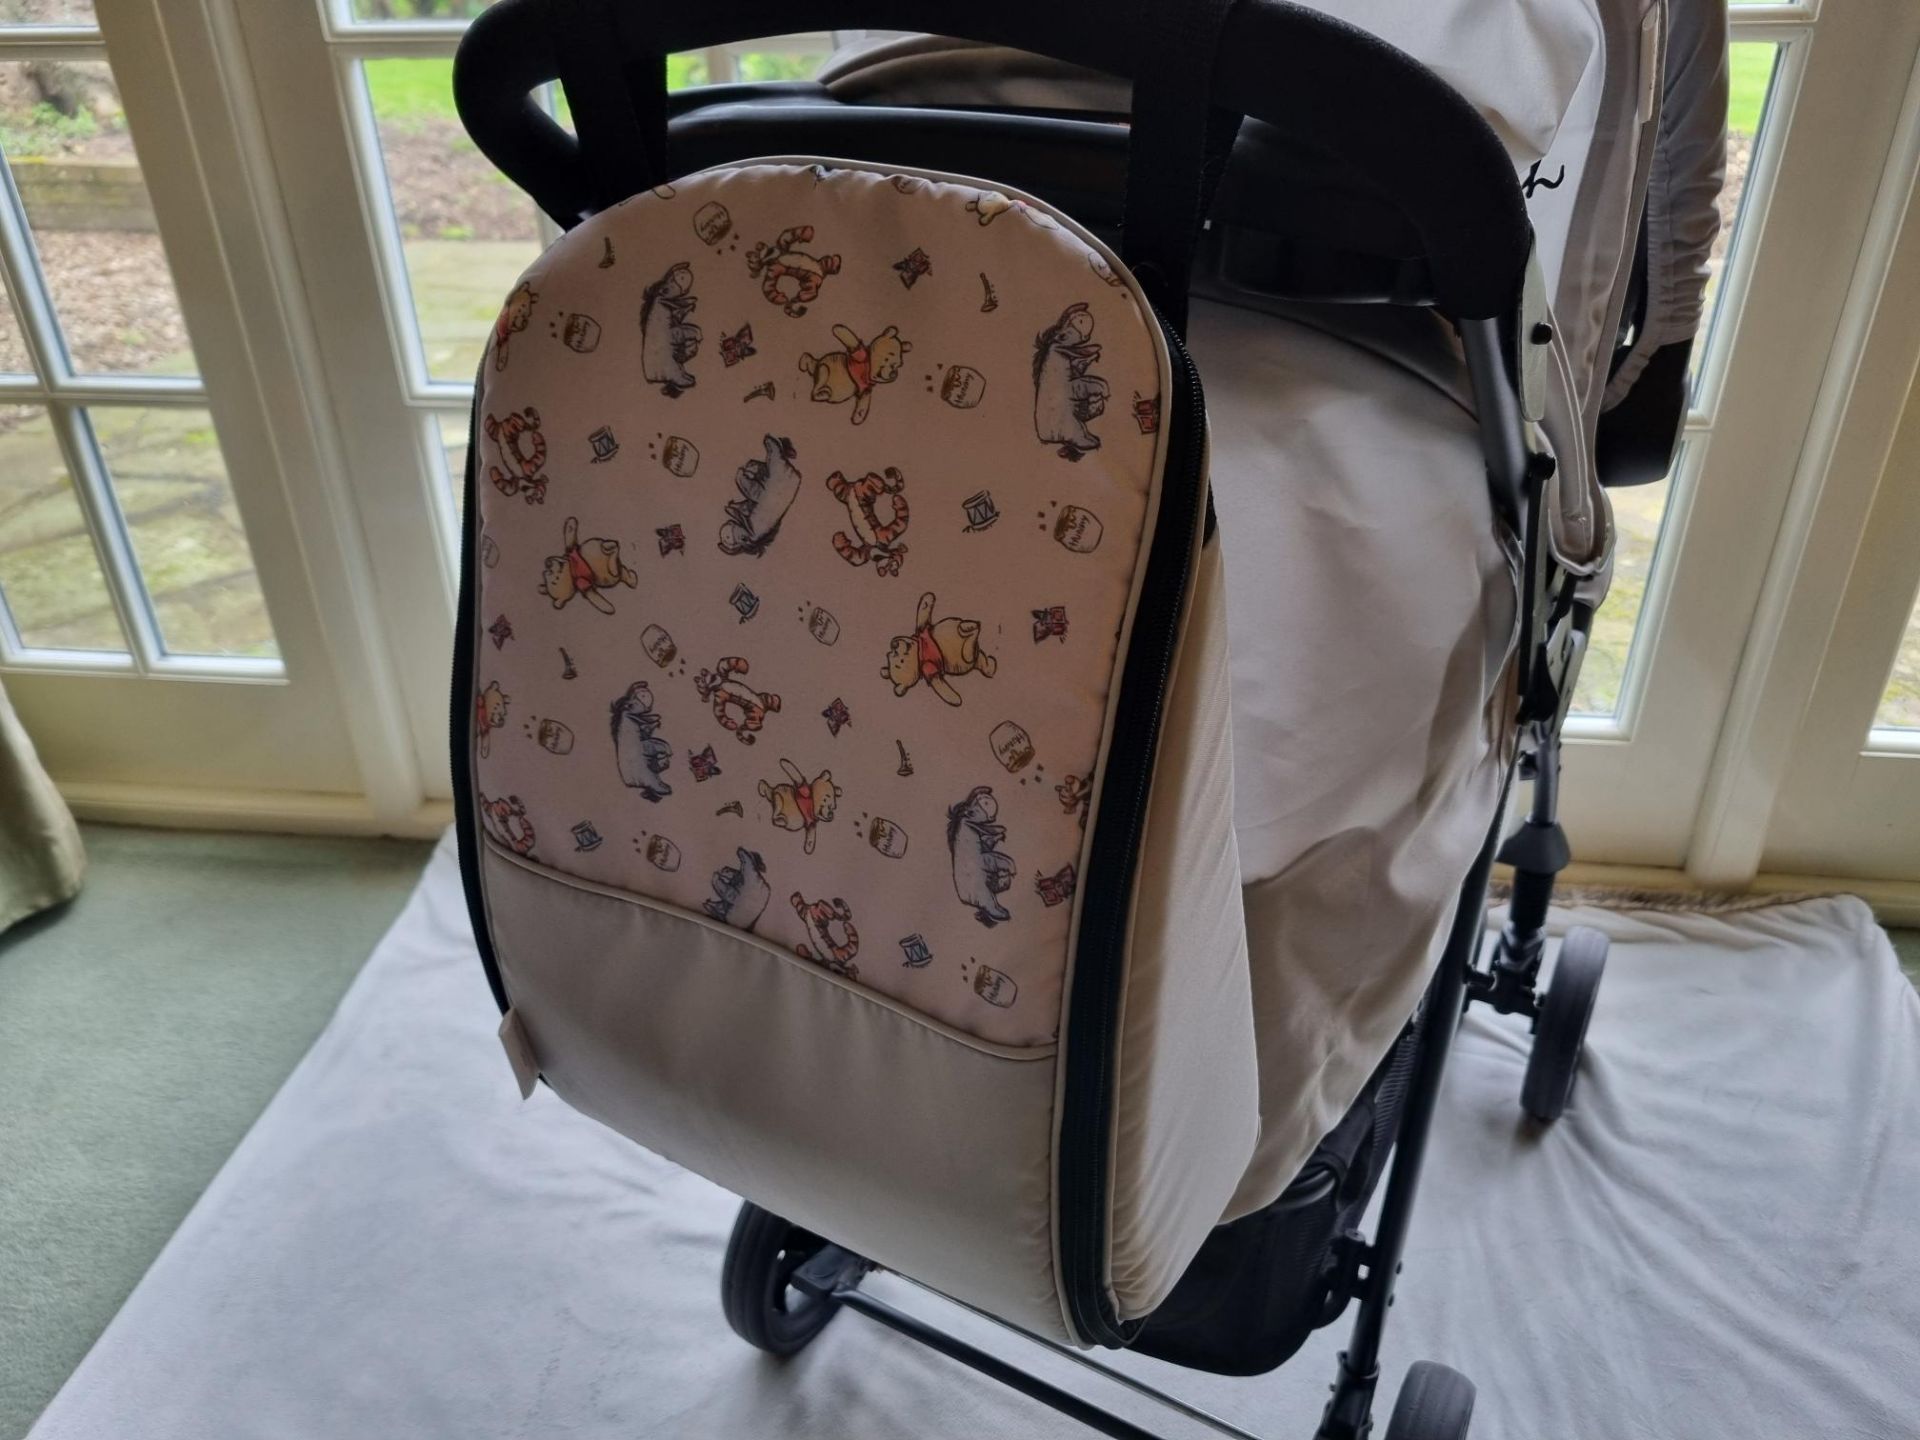 Hauck Disney Pushchair Travel System, Highchair, Tommee Tippee bottle warmer and case, playmat, toys - Image 5 of 24